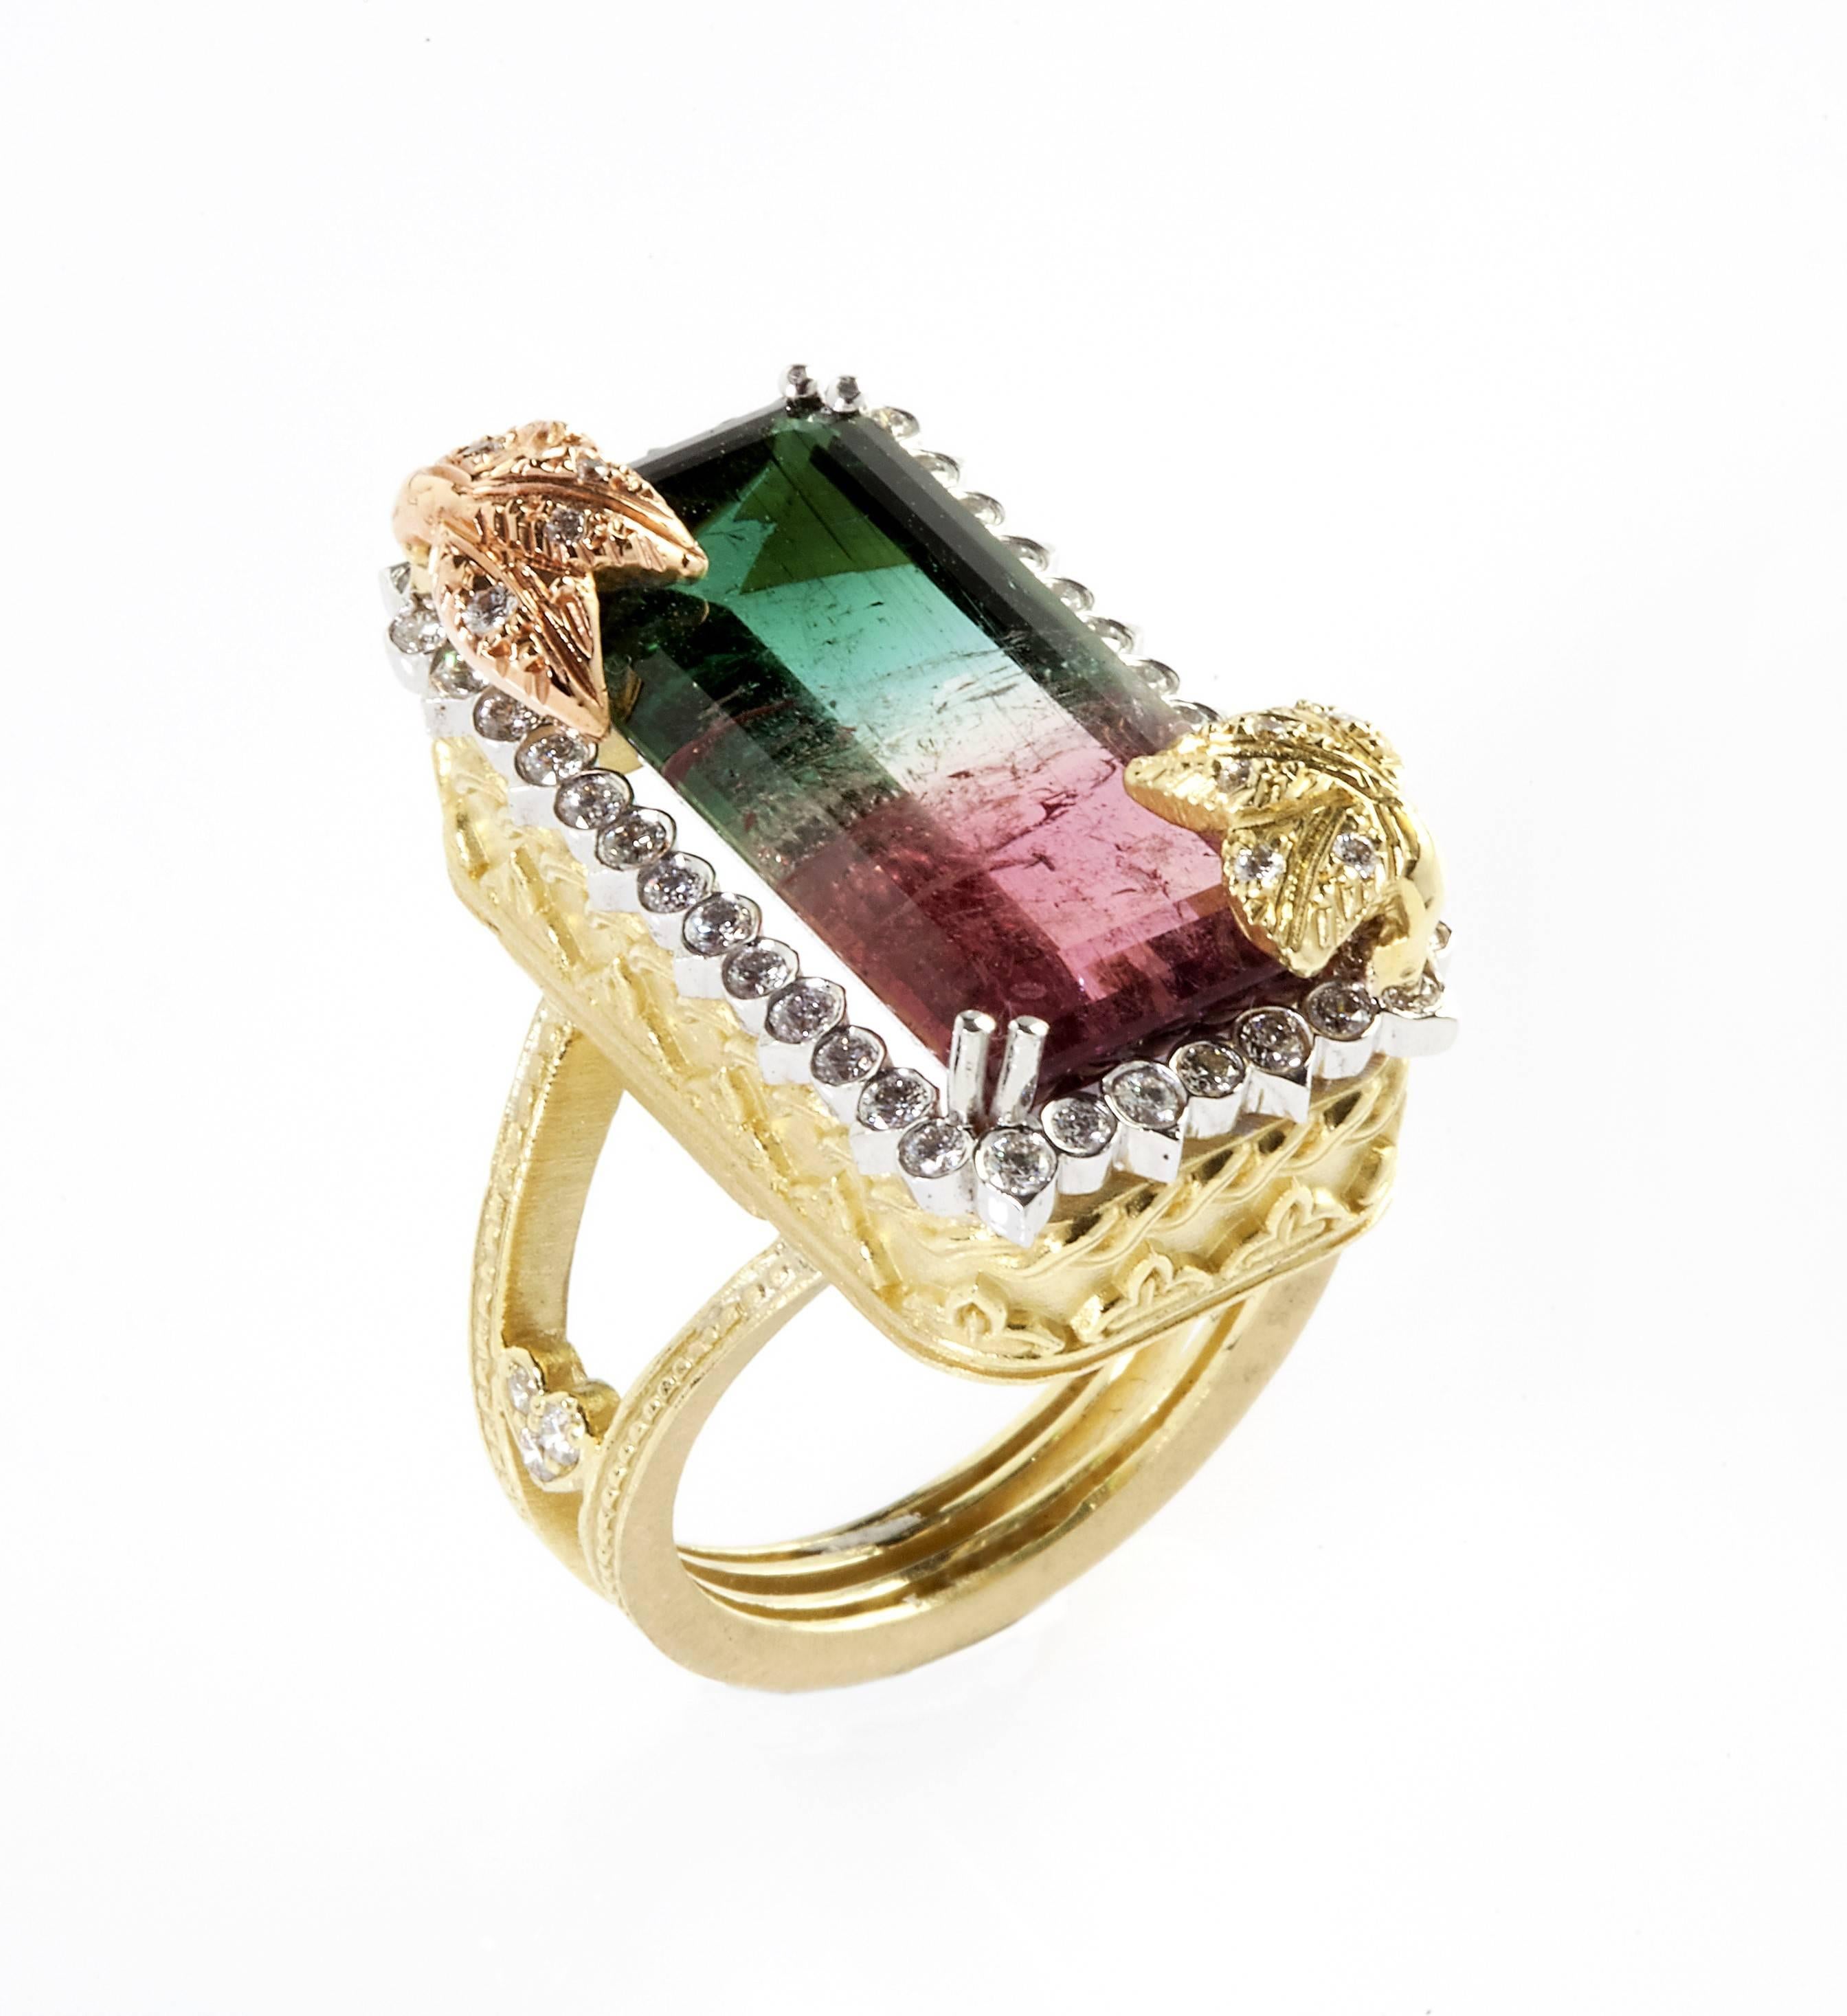 18K Tri-Color Gold Ring with Watermelon Tourmaline Center surrounded by diamonds

16.52ct. Watermelon Tourmaline Center, above two corners are pink and yellow  gold with diamonds, floral design work.

Watermelon Tourmaline 23mm x